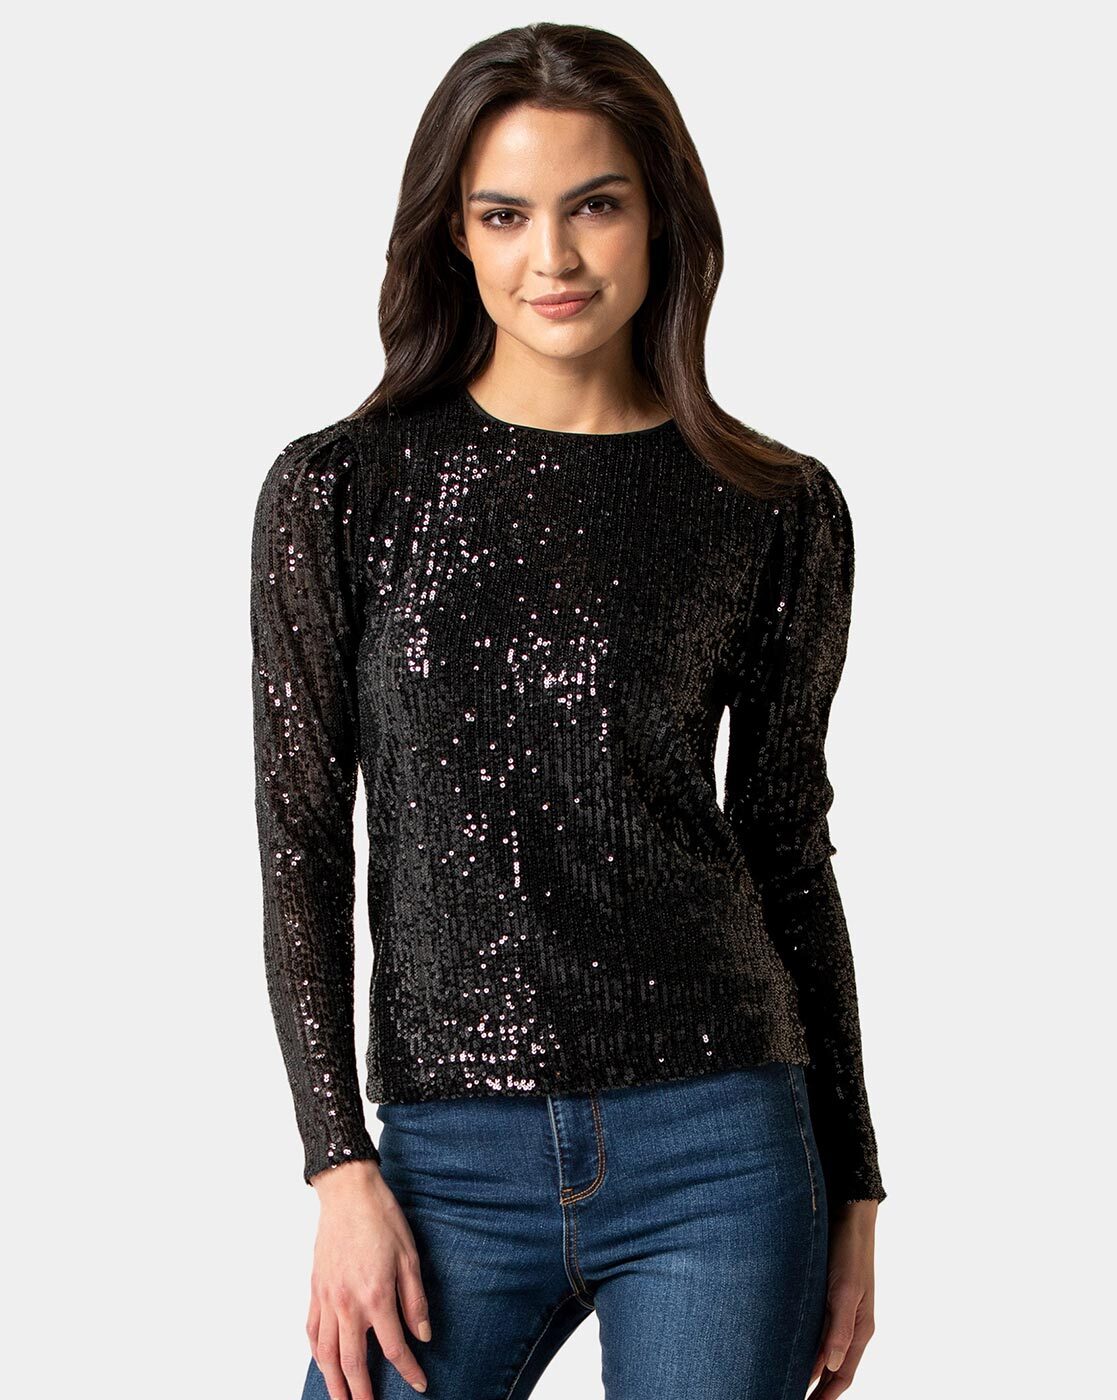 Black sequin top with jeans | Dresses Images 2022